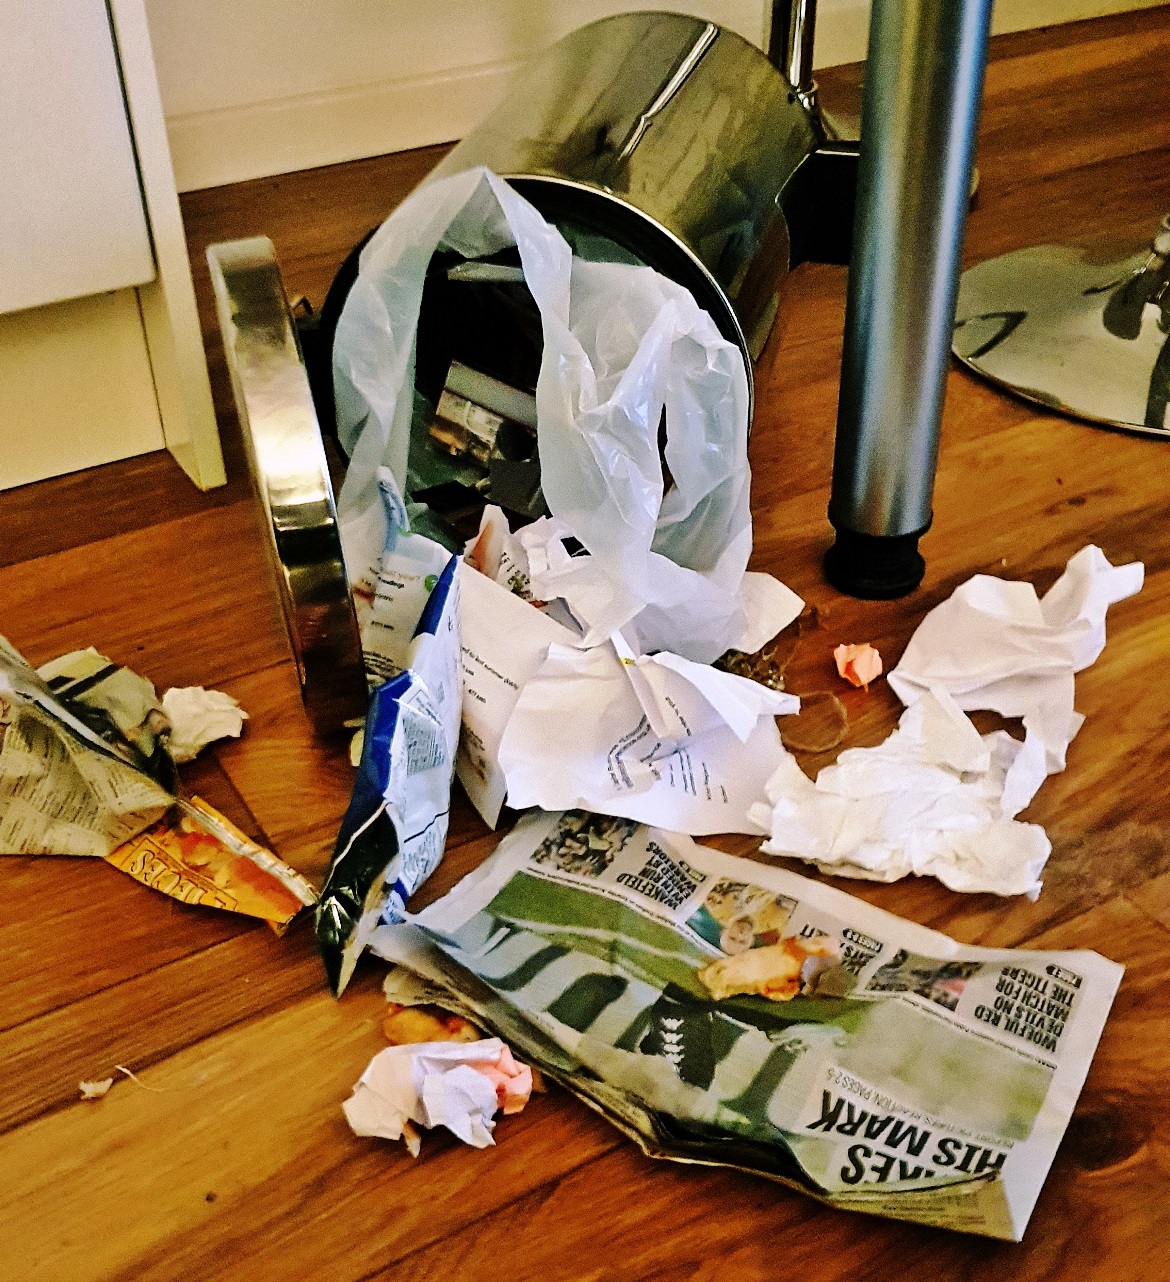 Overturned bin in Lucy's flat - The Lucky Ones, immersive theatre experience by Riptide Leeds, review by BeckyBecky Blogs